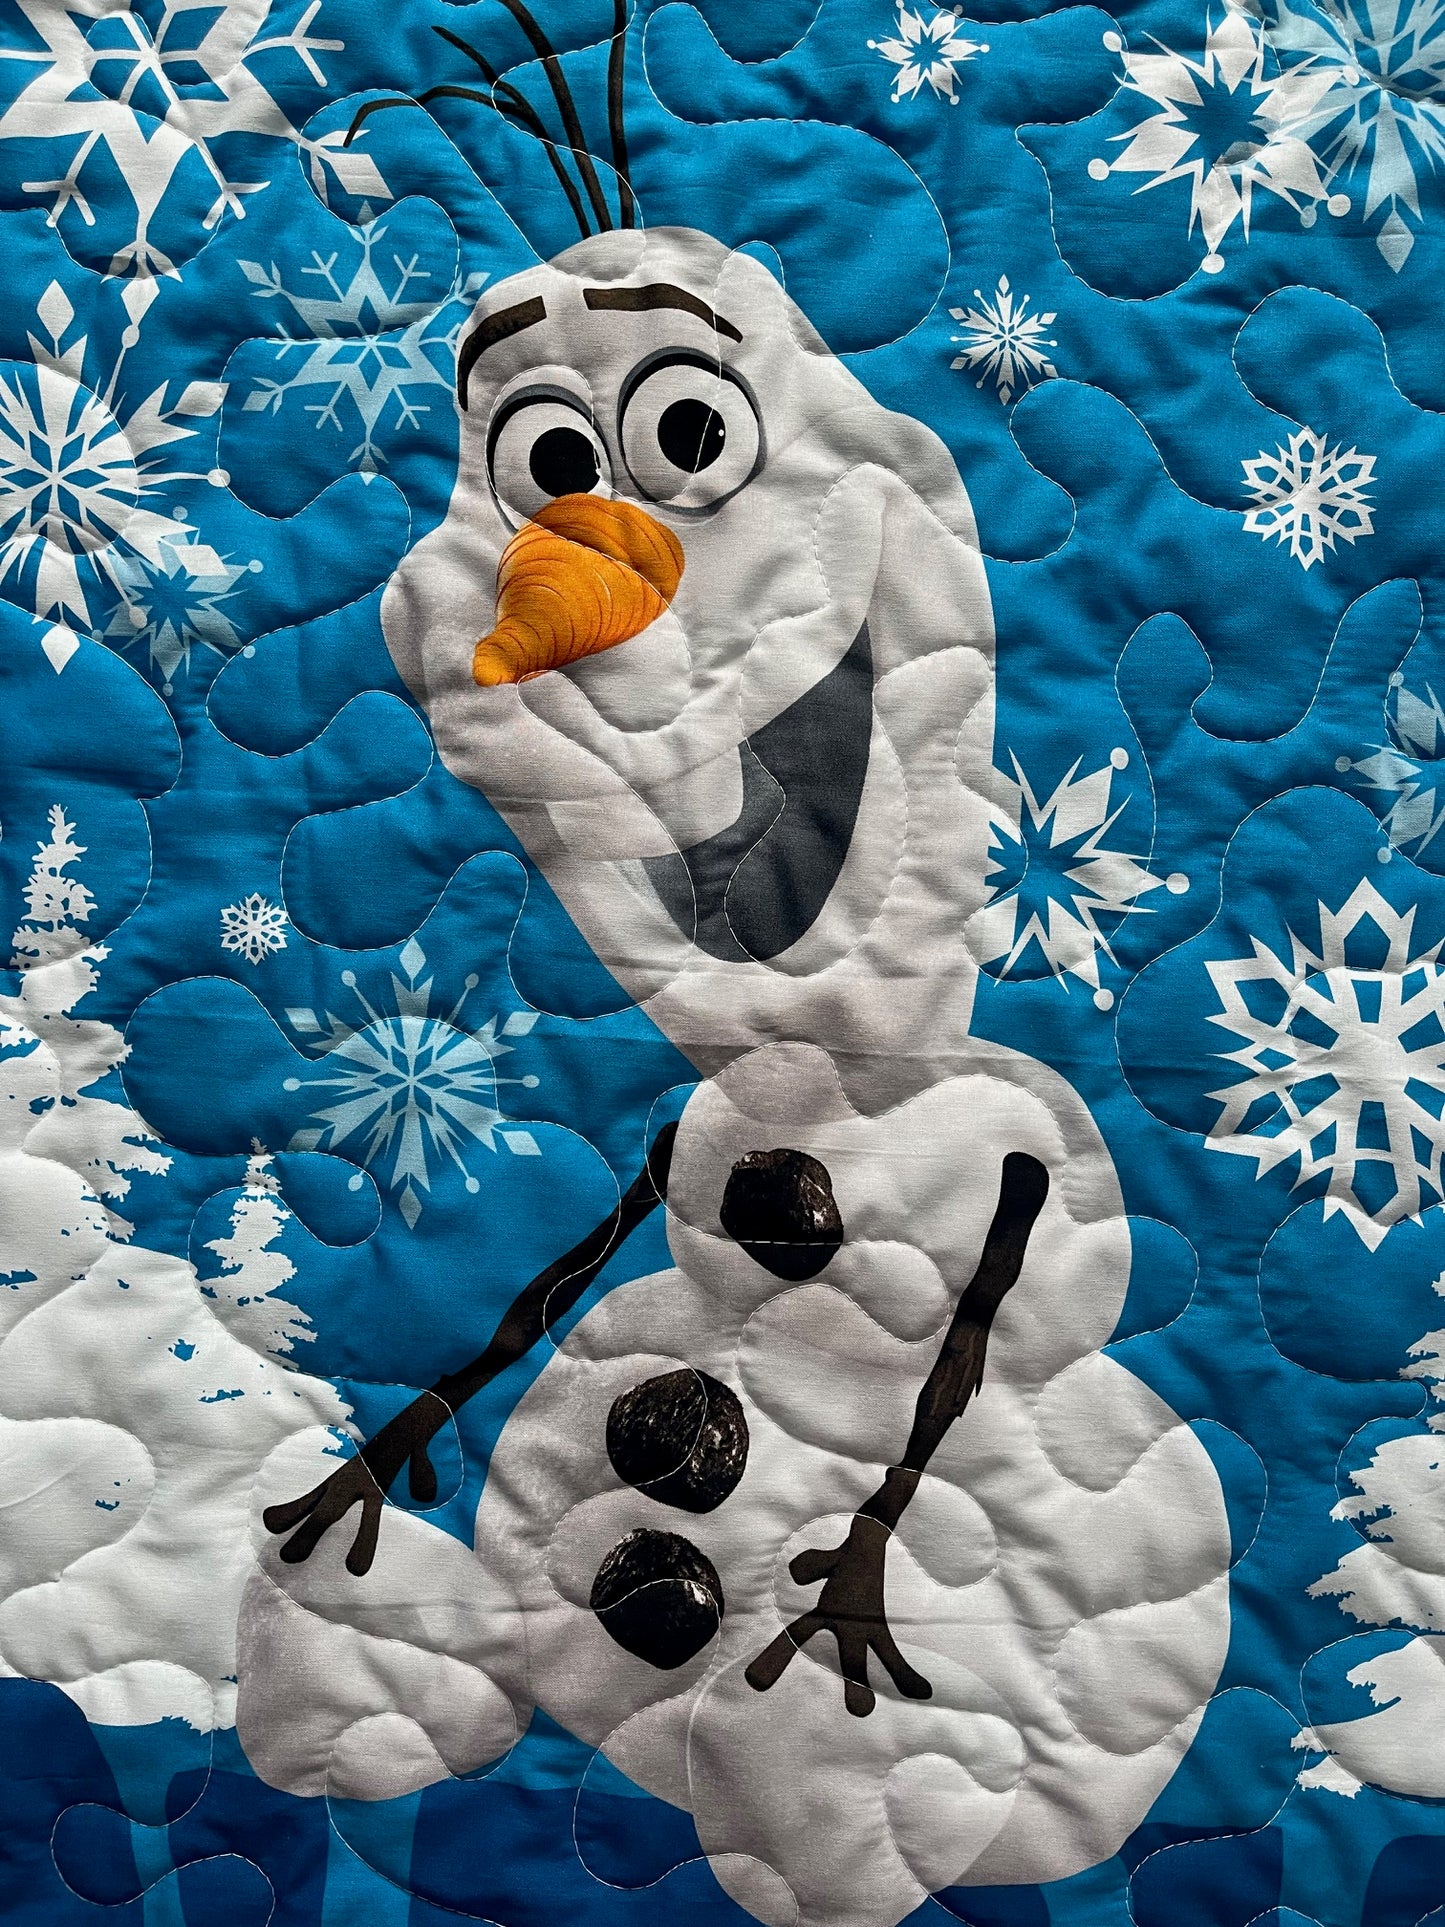 OLAF FROZEN INSPIRED QUILTED BLANKET 100% Cotton